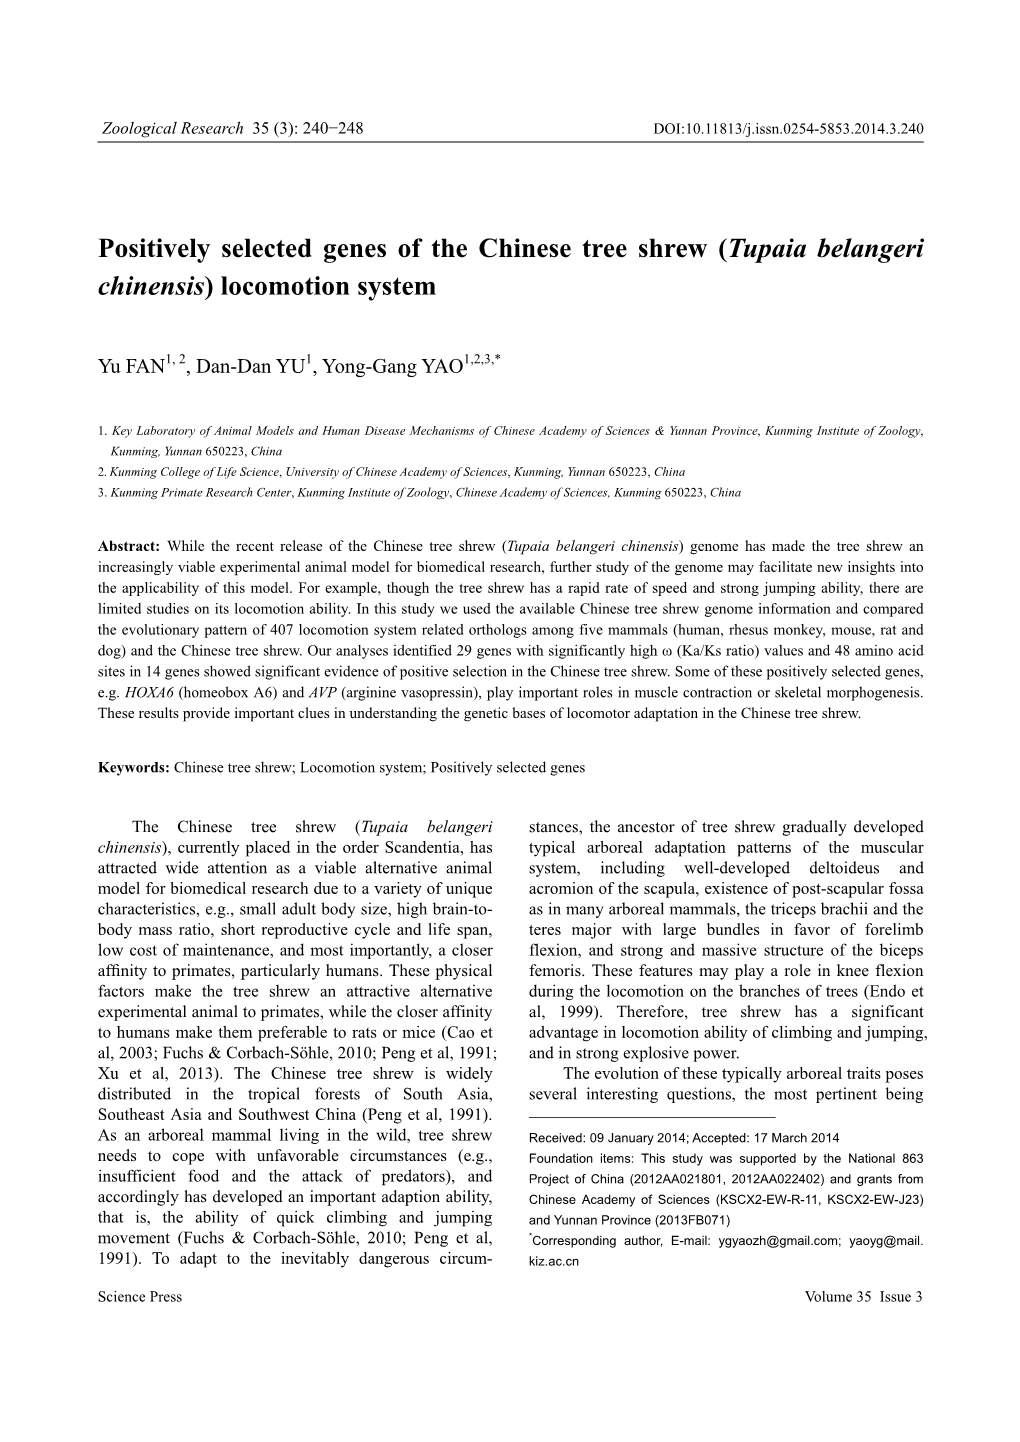 Positively Selected Genes of the Chinese Tree Shrew (Tupaia Belangeri Chinensis) Locomotion System